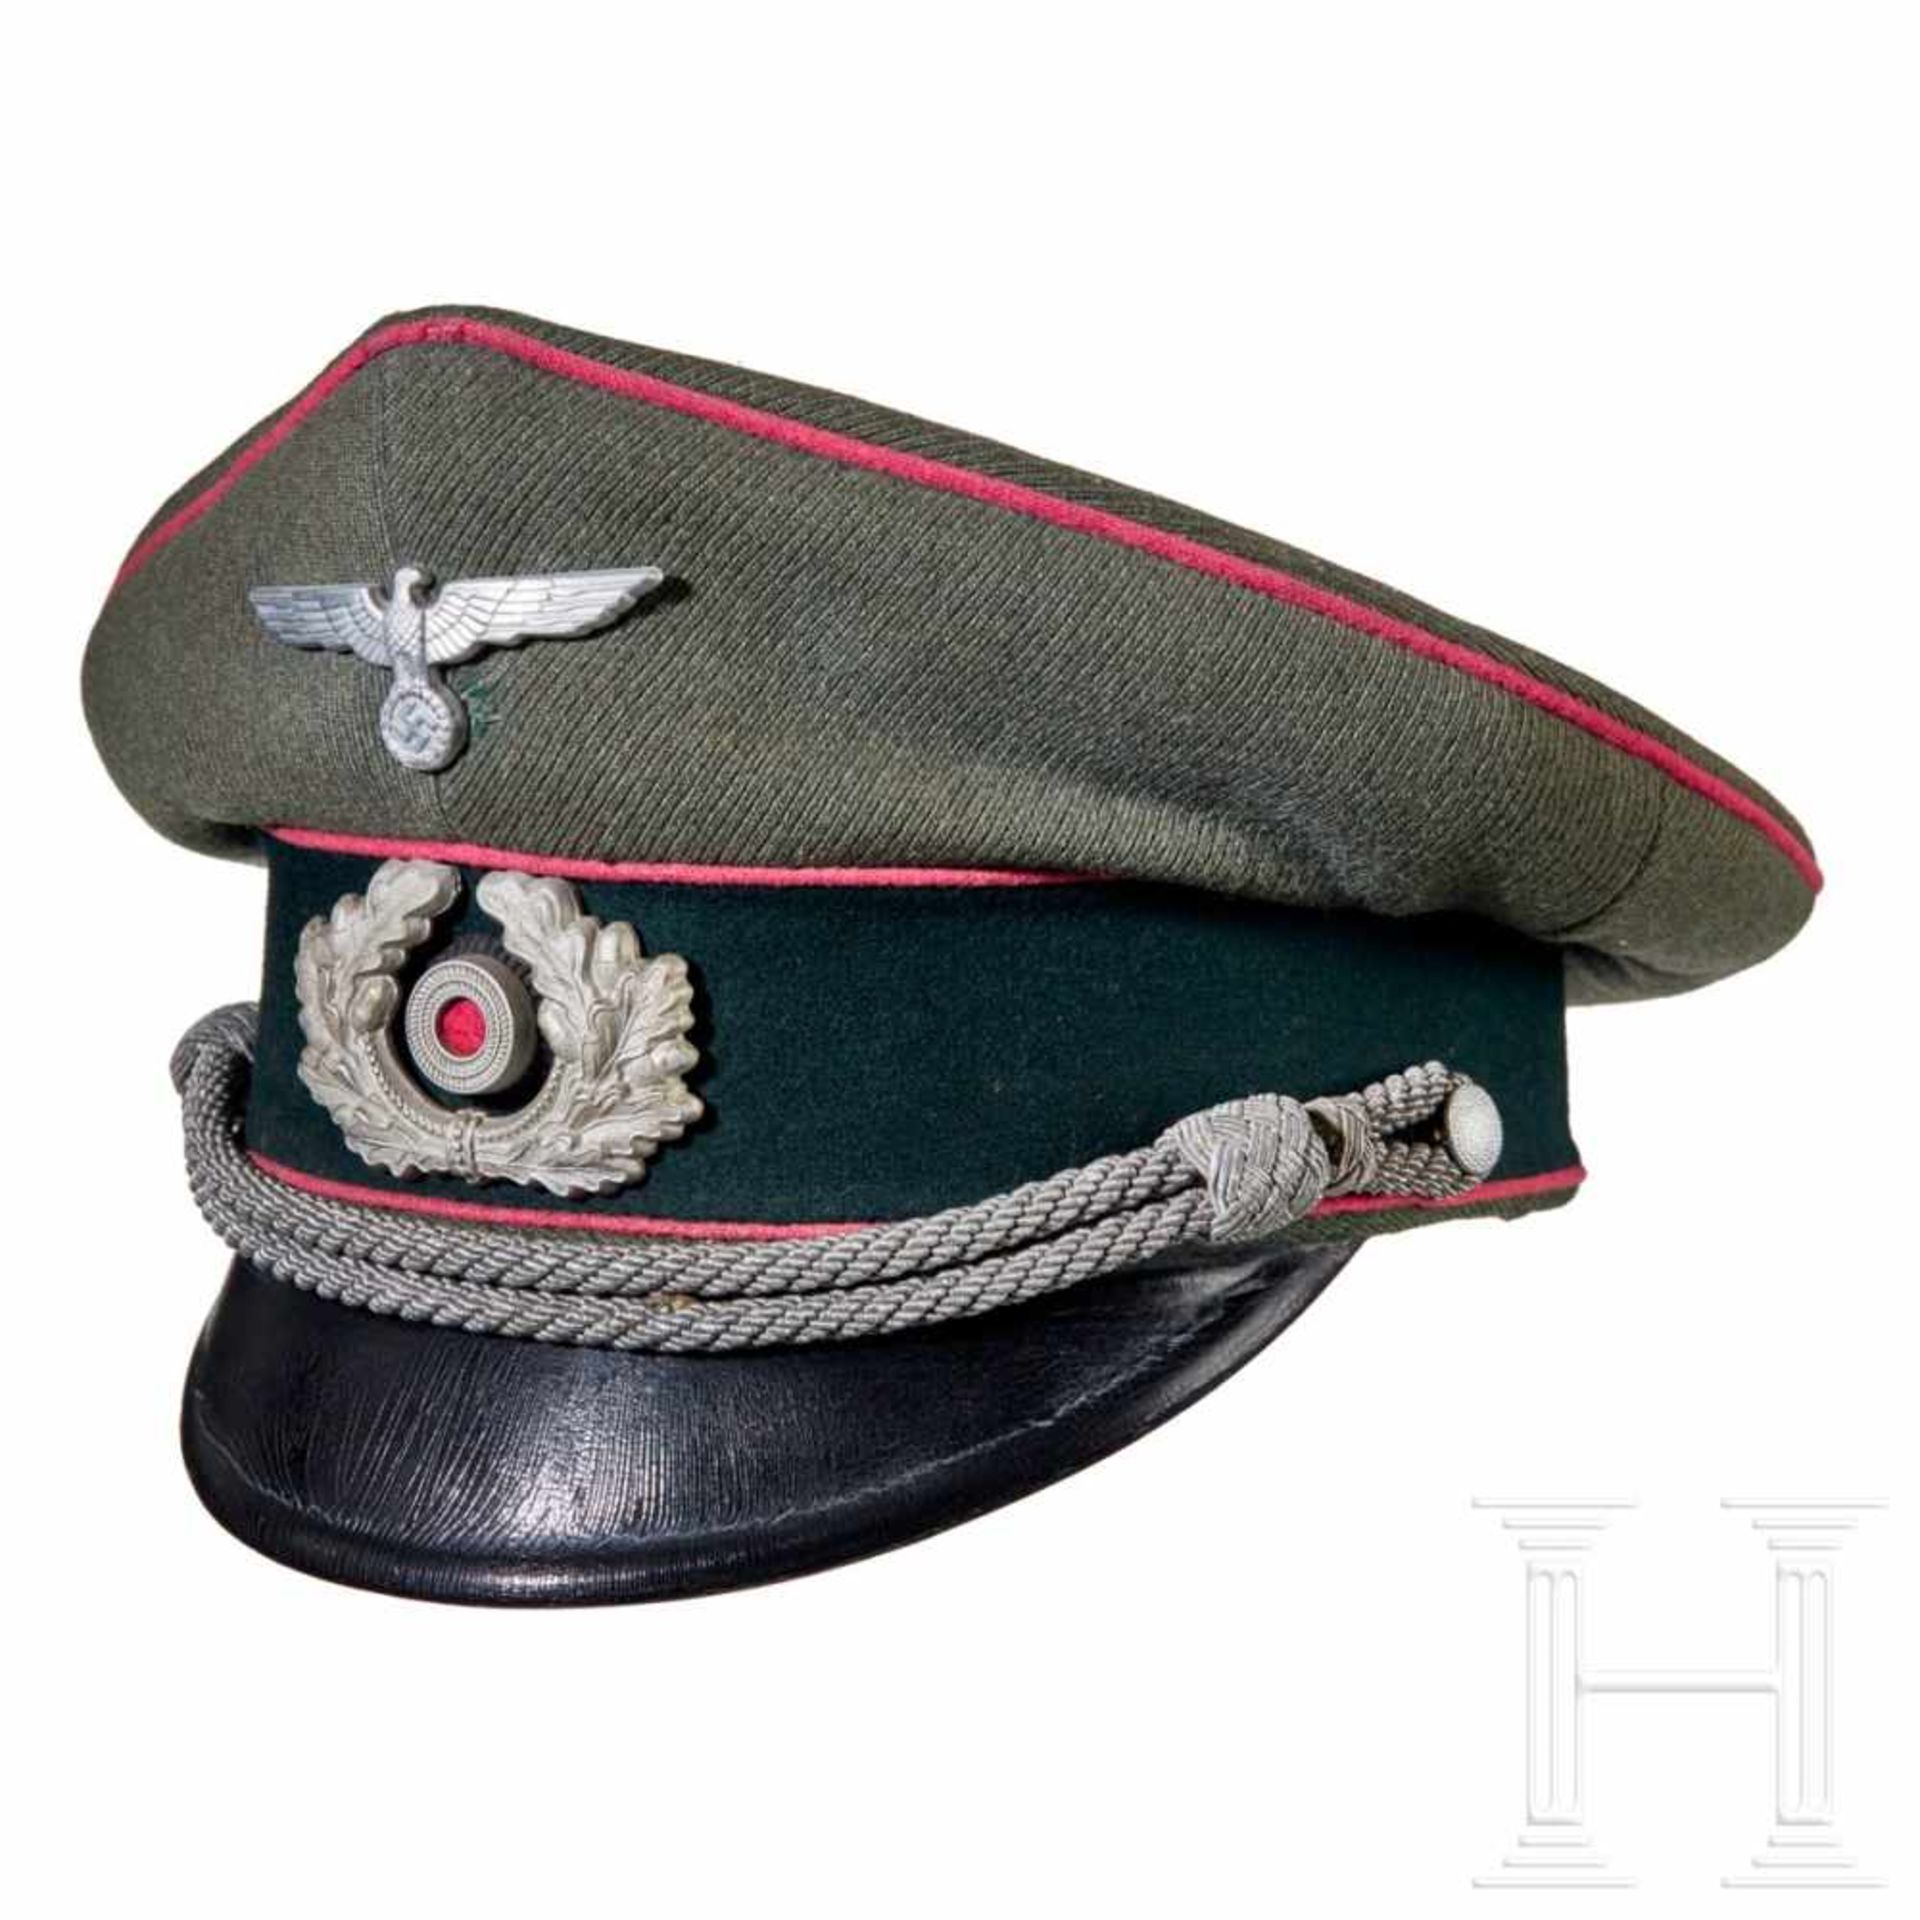 A visor cap for officers of the army, PanzerField-grey ribbed tricot wool body with dark green